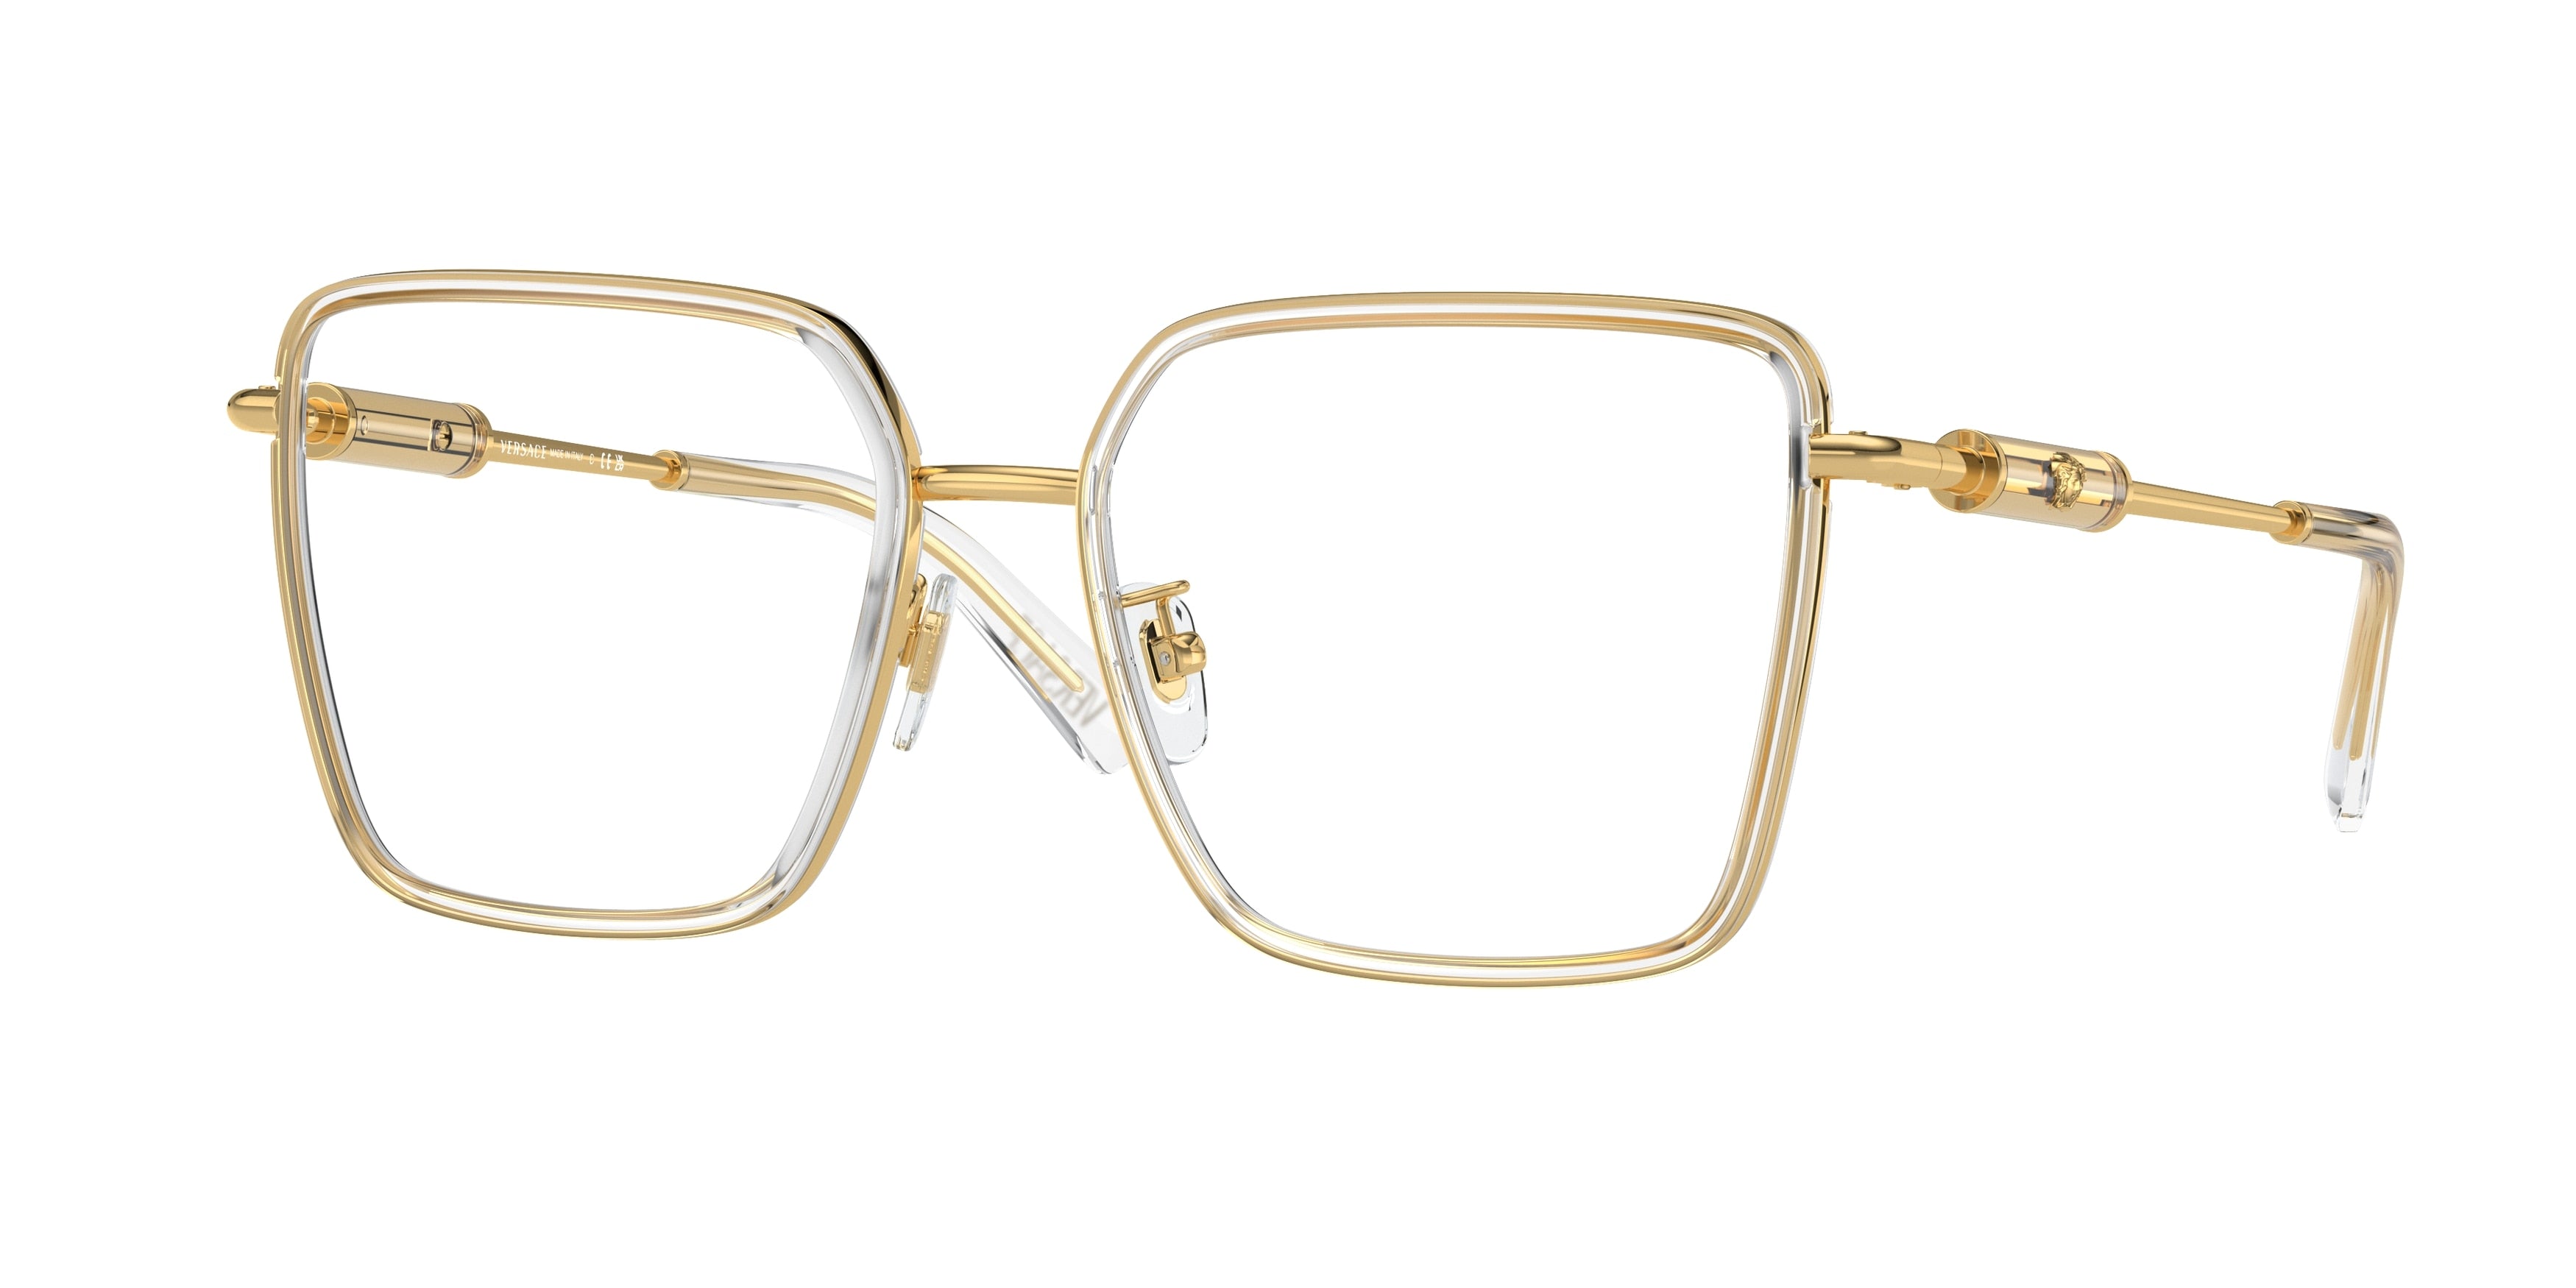 Versace VE1294D Butterfly Eyeglasses  1508-Crystal 55-140-17 - Color Map White